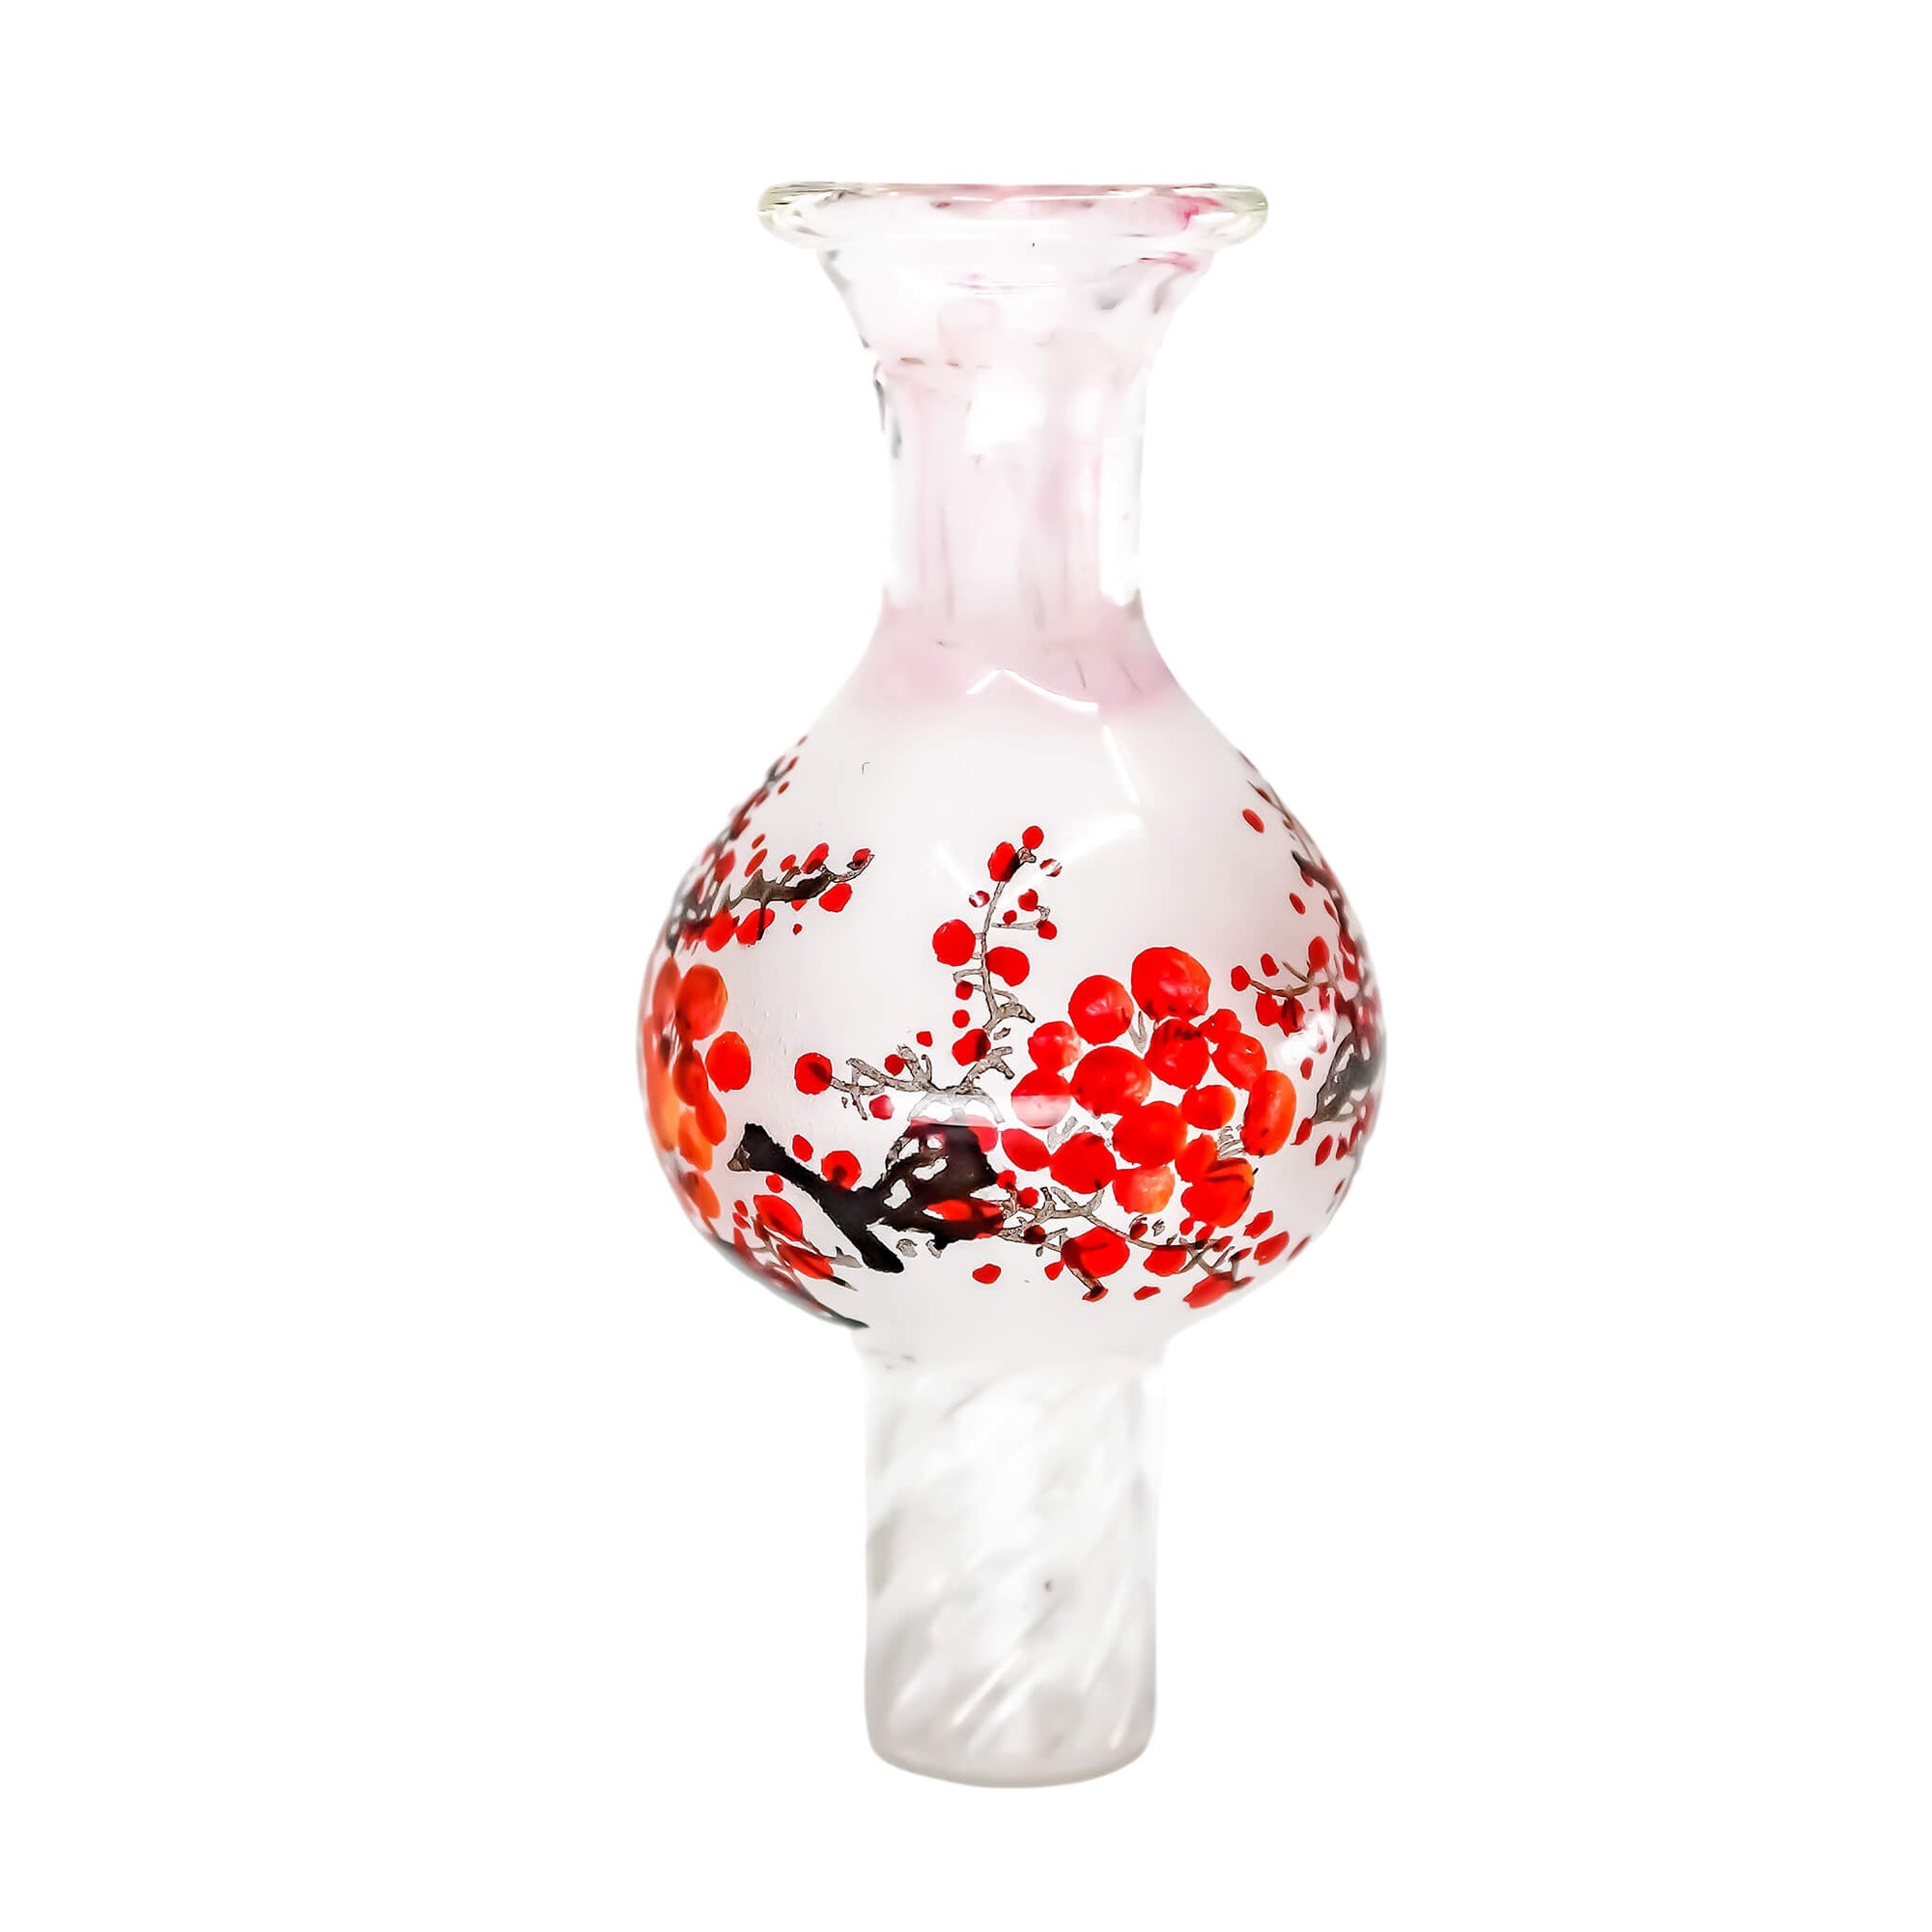 Zen Spinner Bubble Cap | Black Branches Red Blooms Variation View | the dabbing specialists